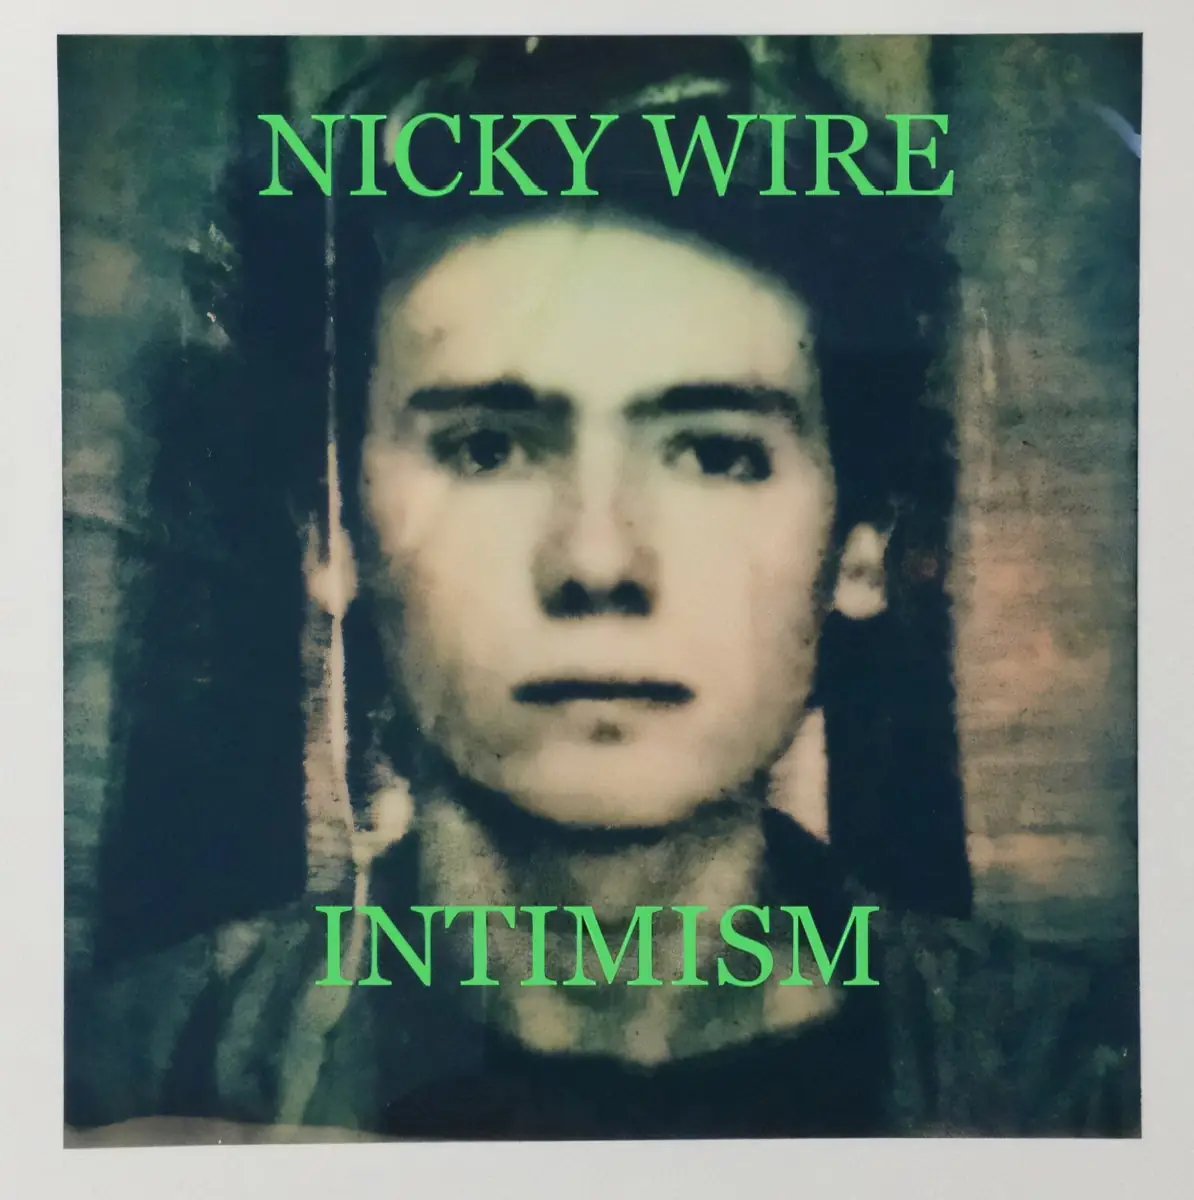 ALBUM REVIEW: Nicky Wire – Intimism